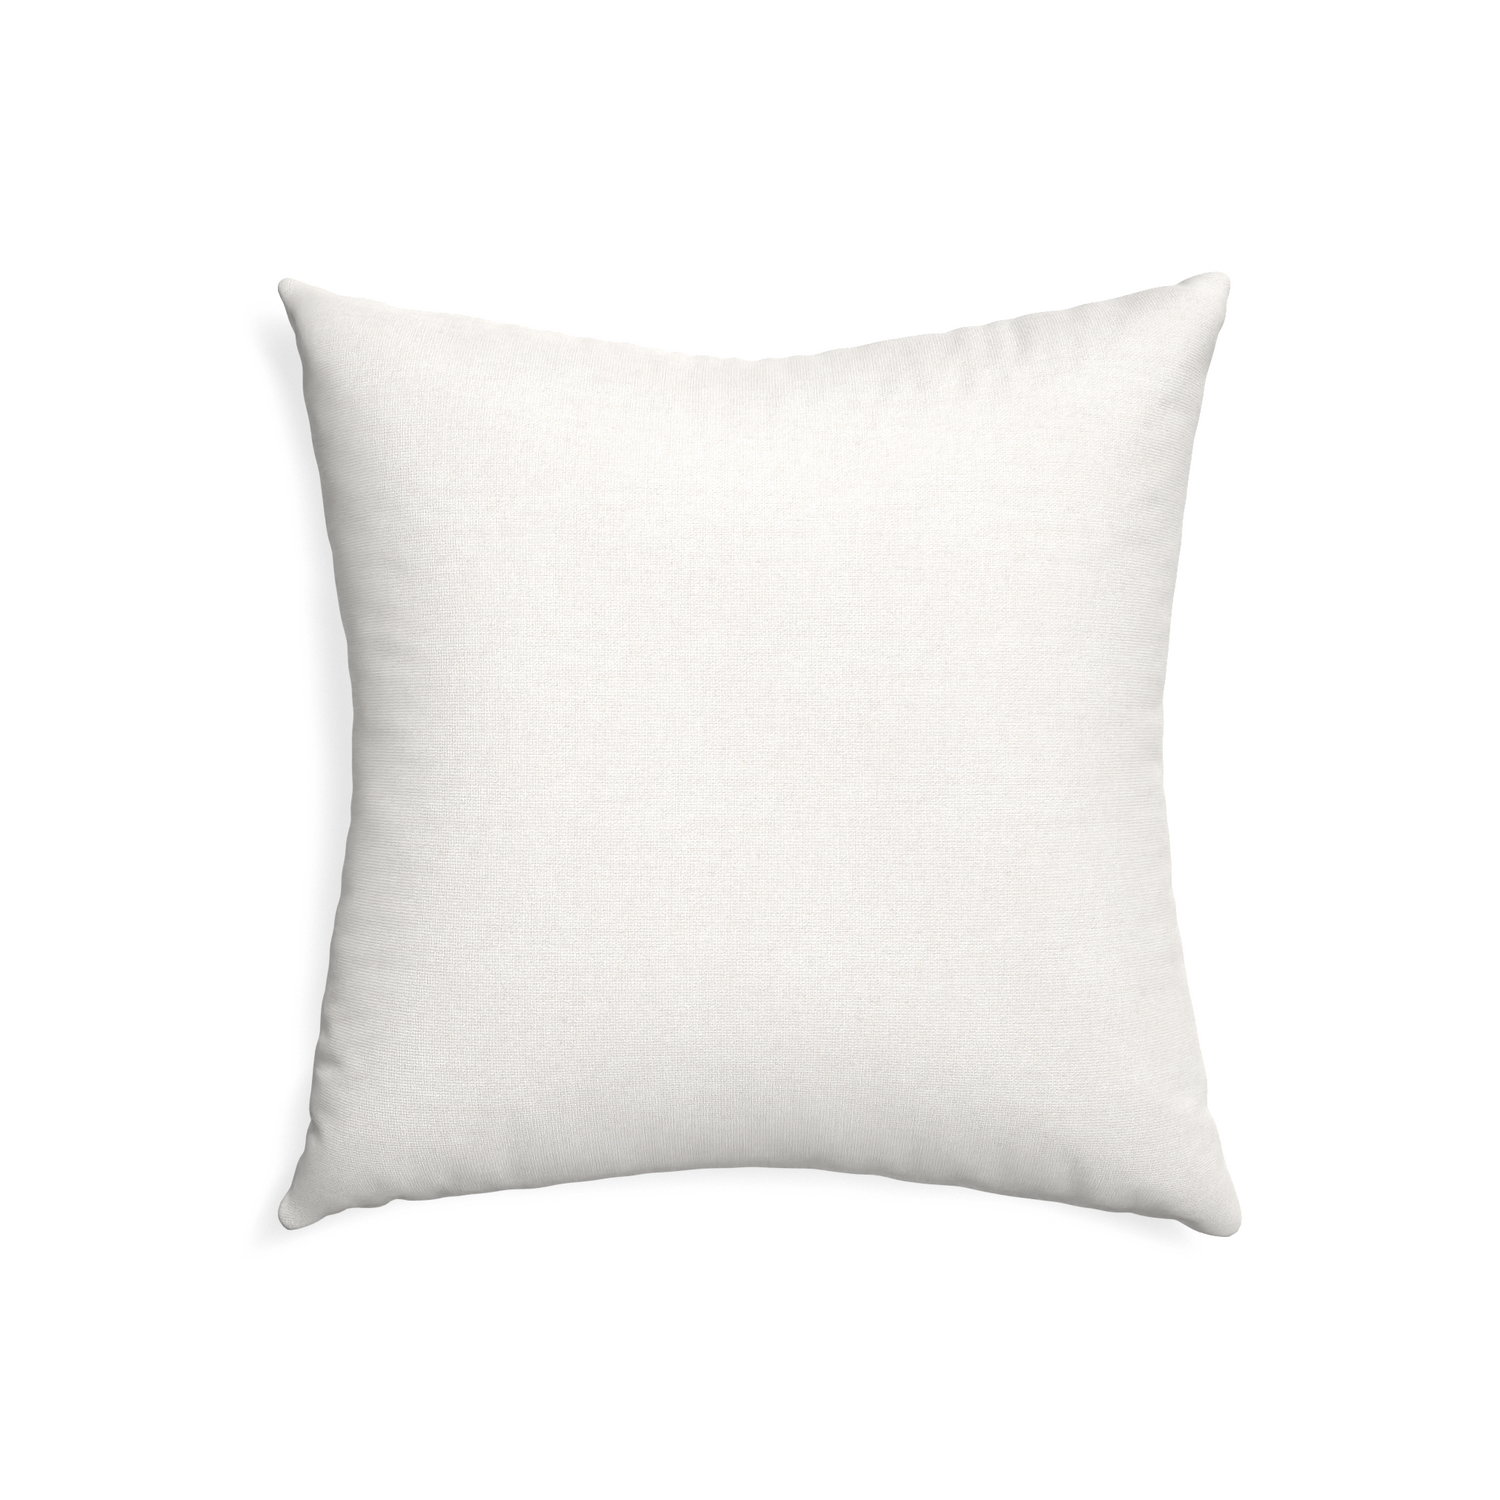 22-square flour custom pillow with none on white background